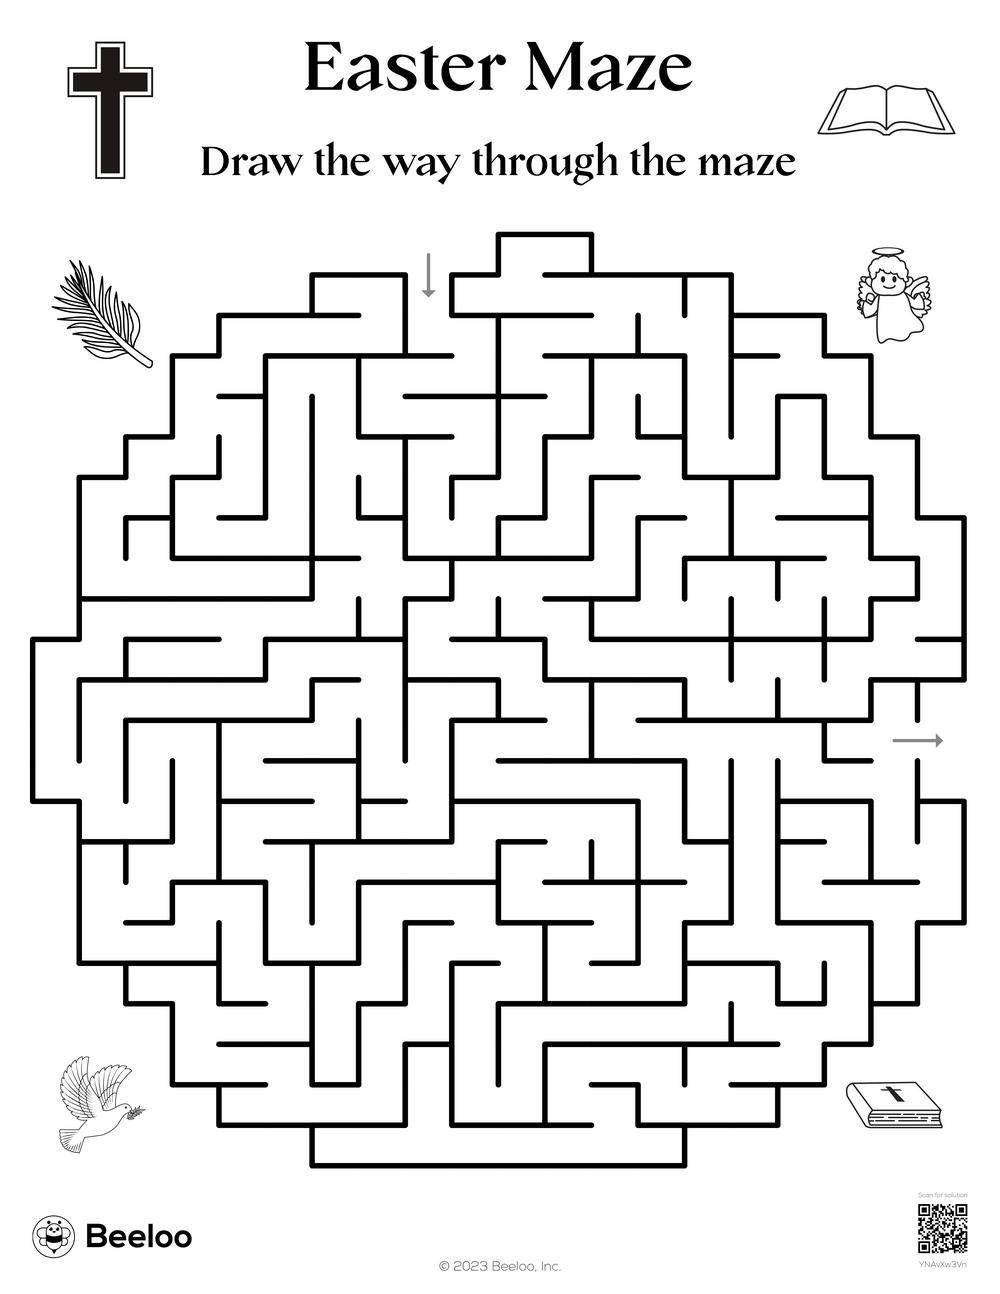 Easter maze â printable crafts and activities for kids